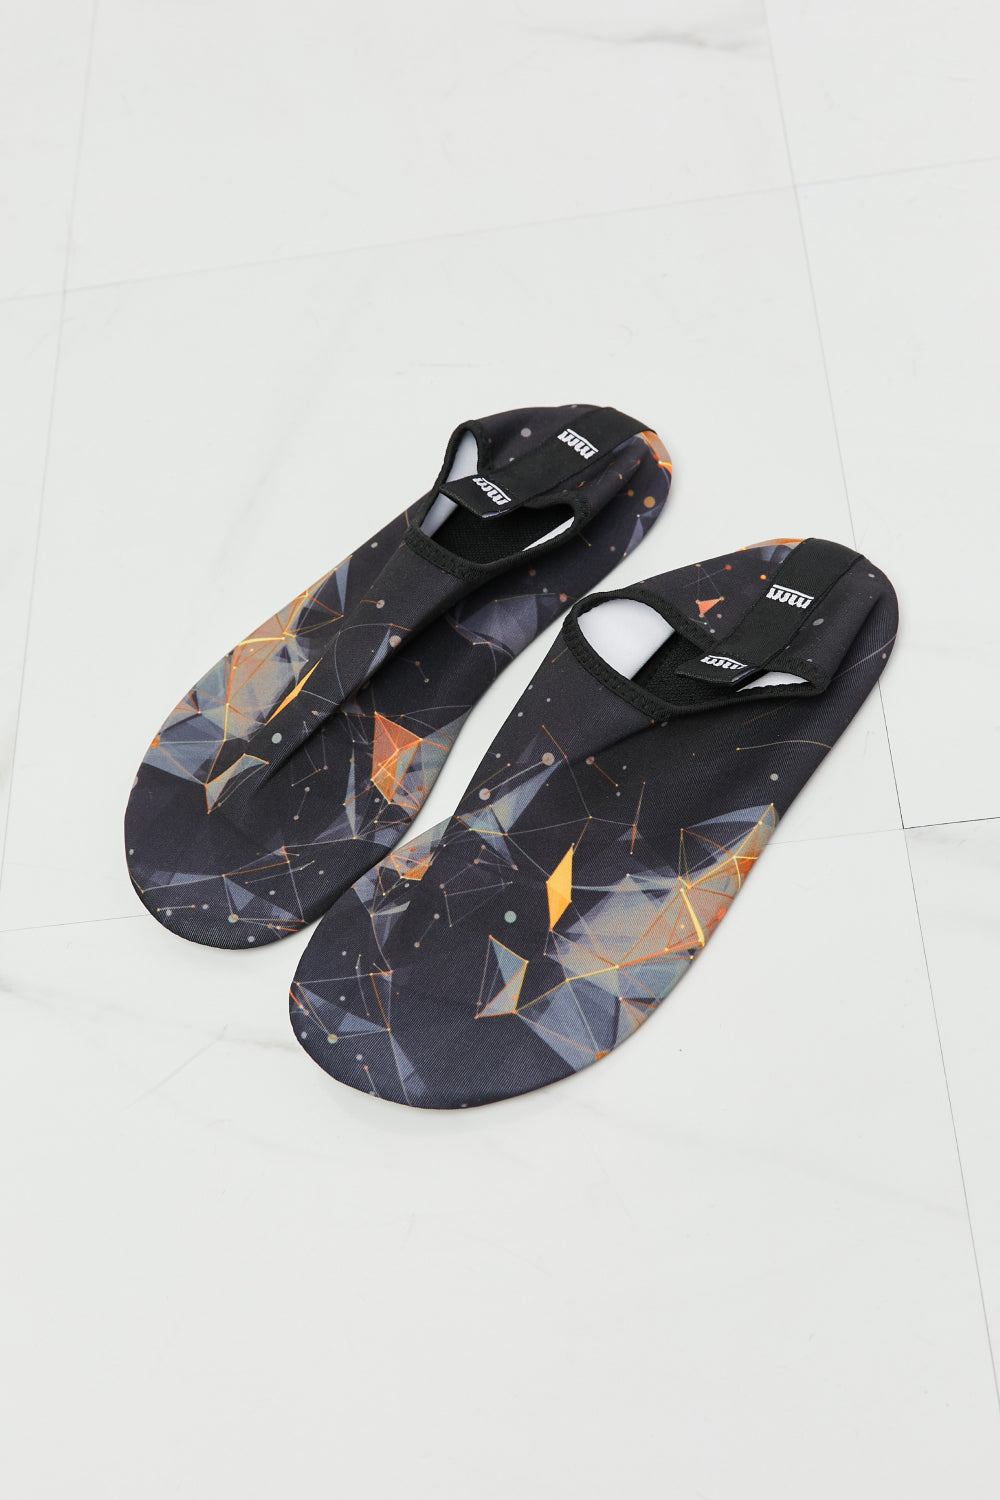 MMshoes On The Shore Water Shoes in Black/Orange - BEAUTY COSMOTICS SHOP